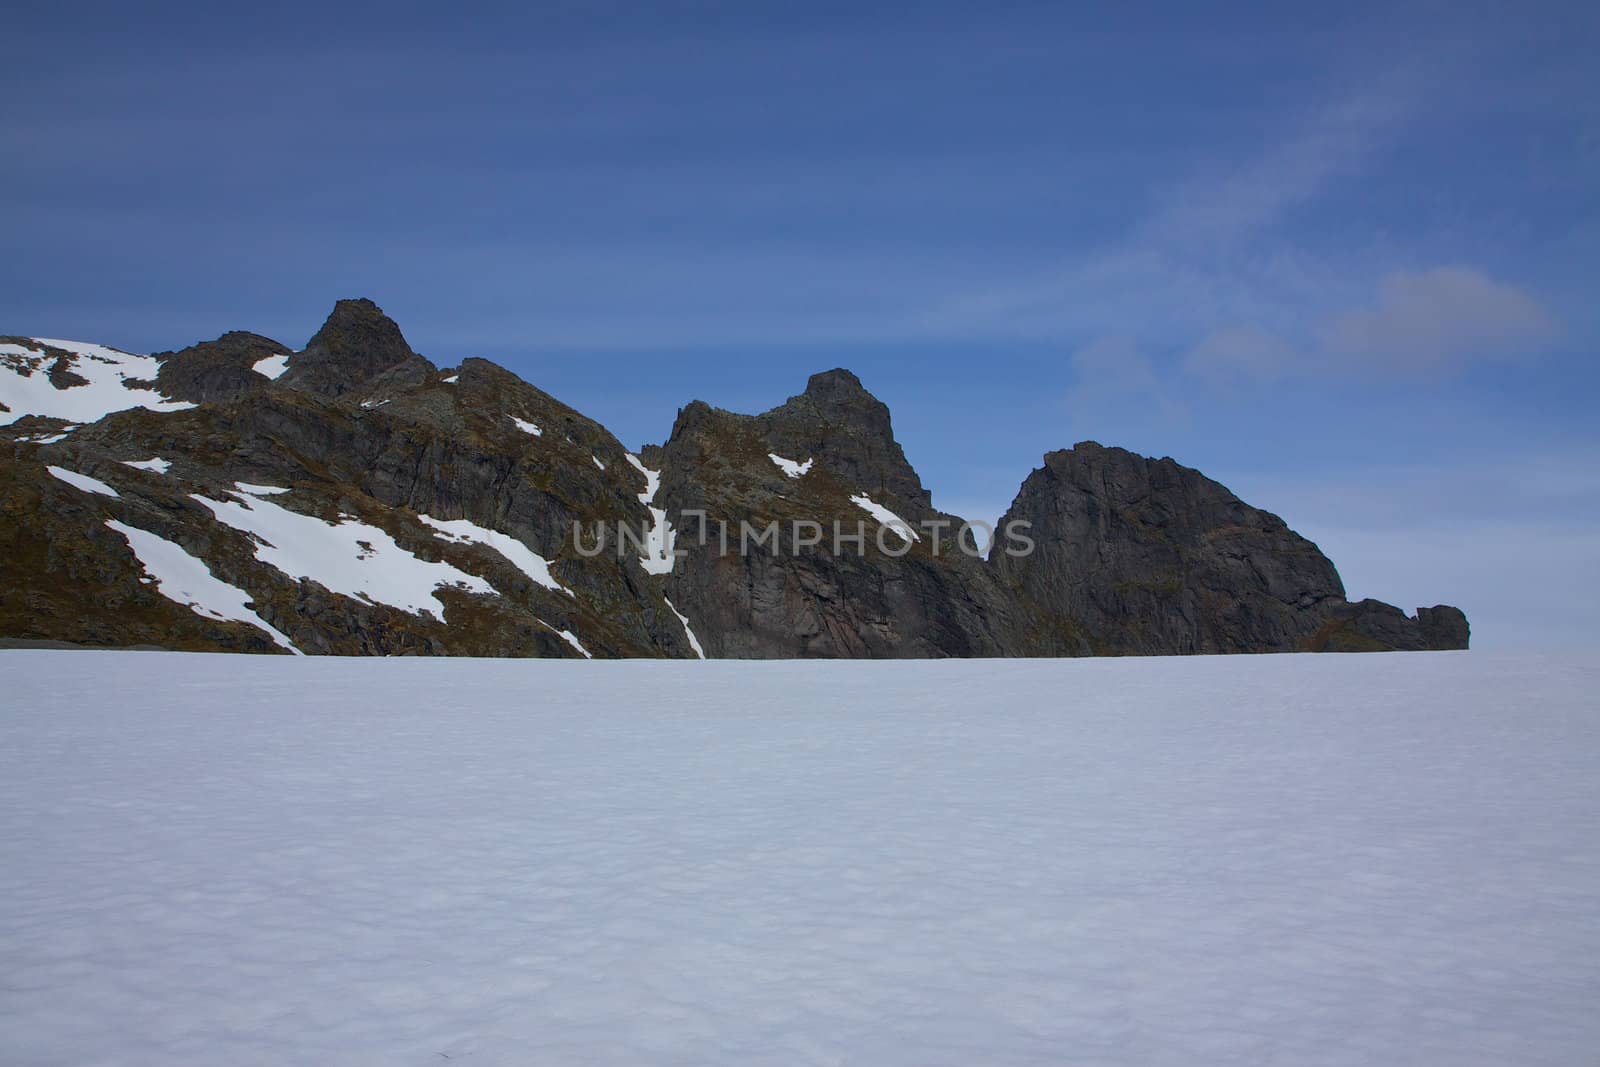 Snow fields in the arctic Norway on Lofoten islands during summer with sharp mountain peaks towering above them